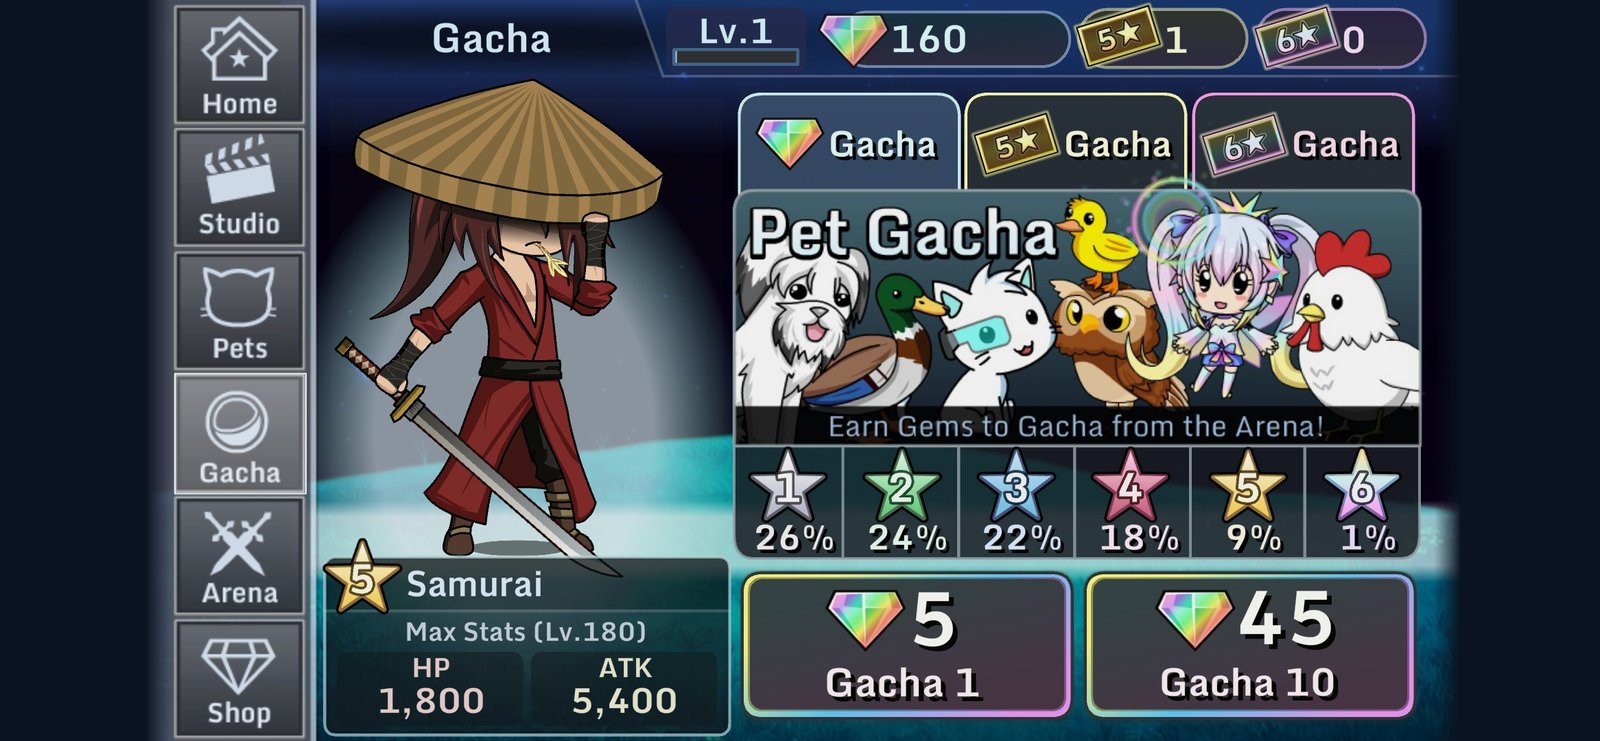 Download Gacha club Edition MOD APK v10.1 (unlimited currency) for